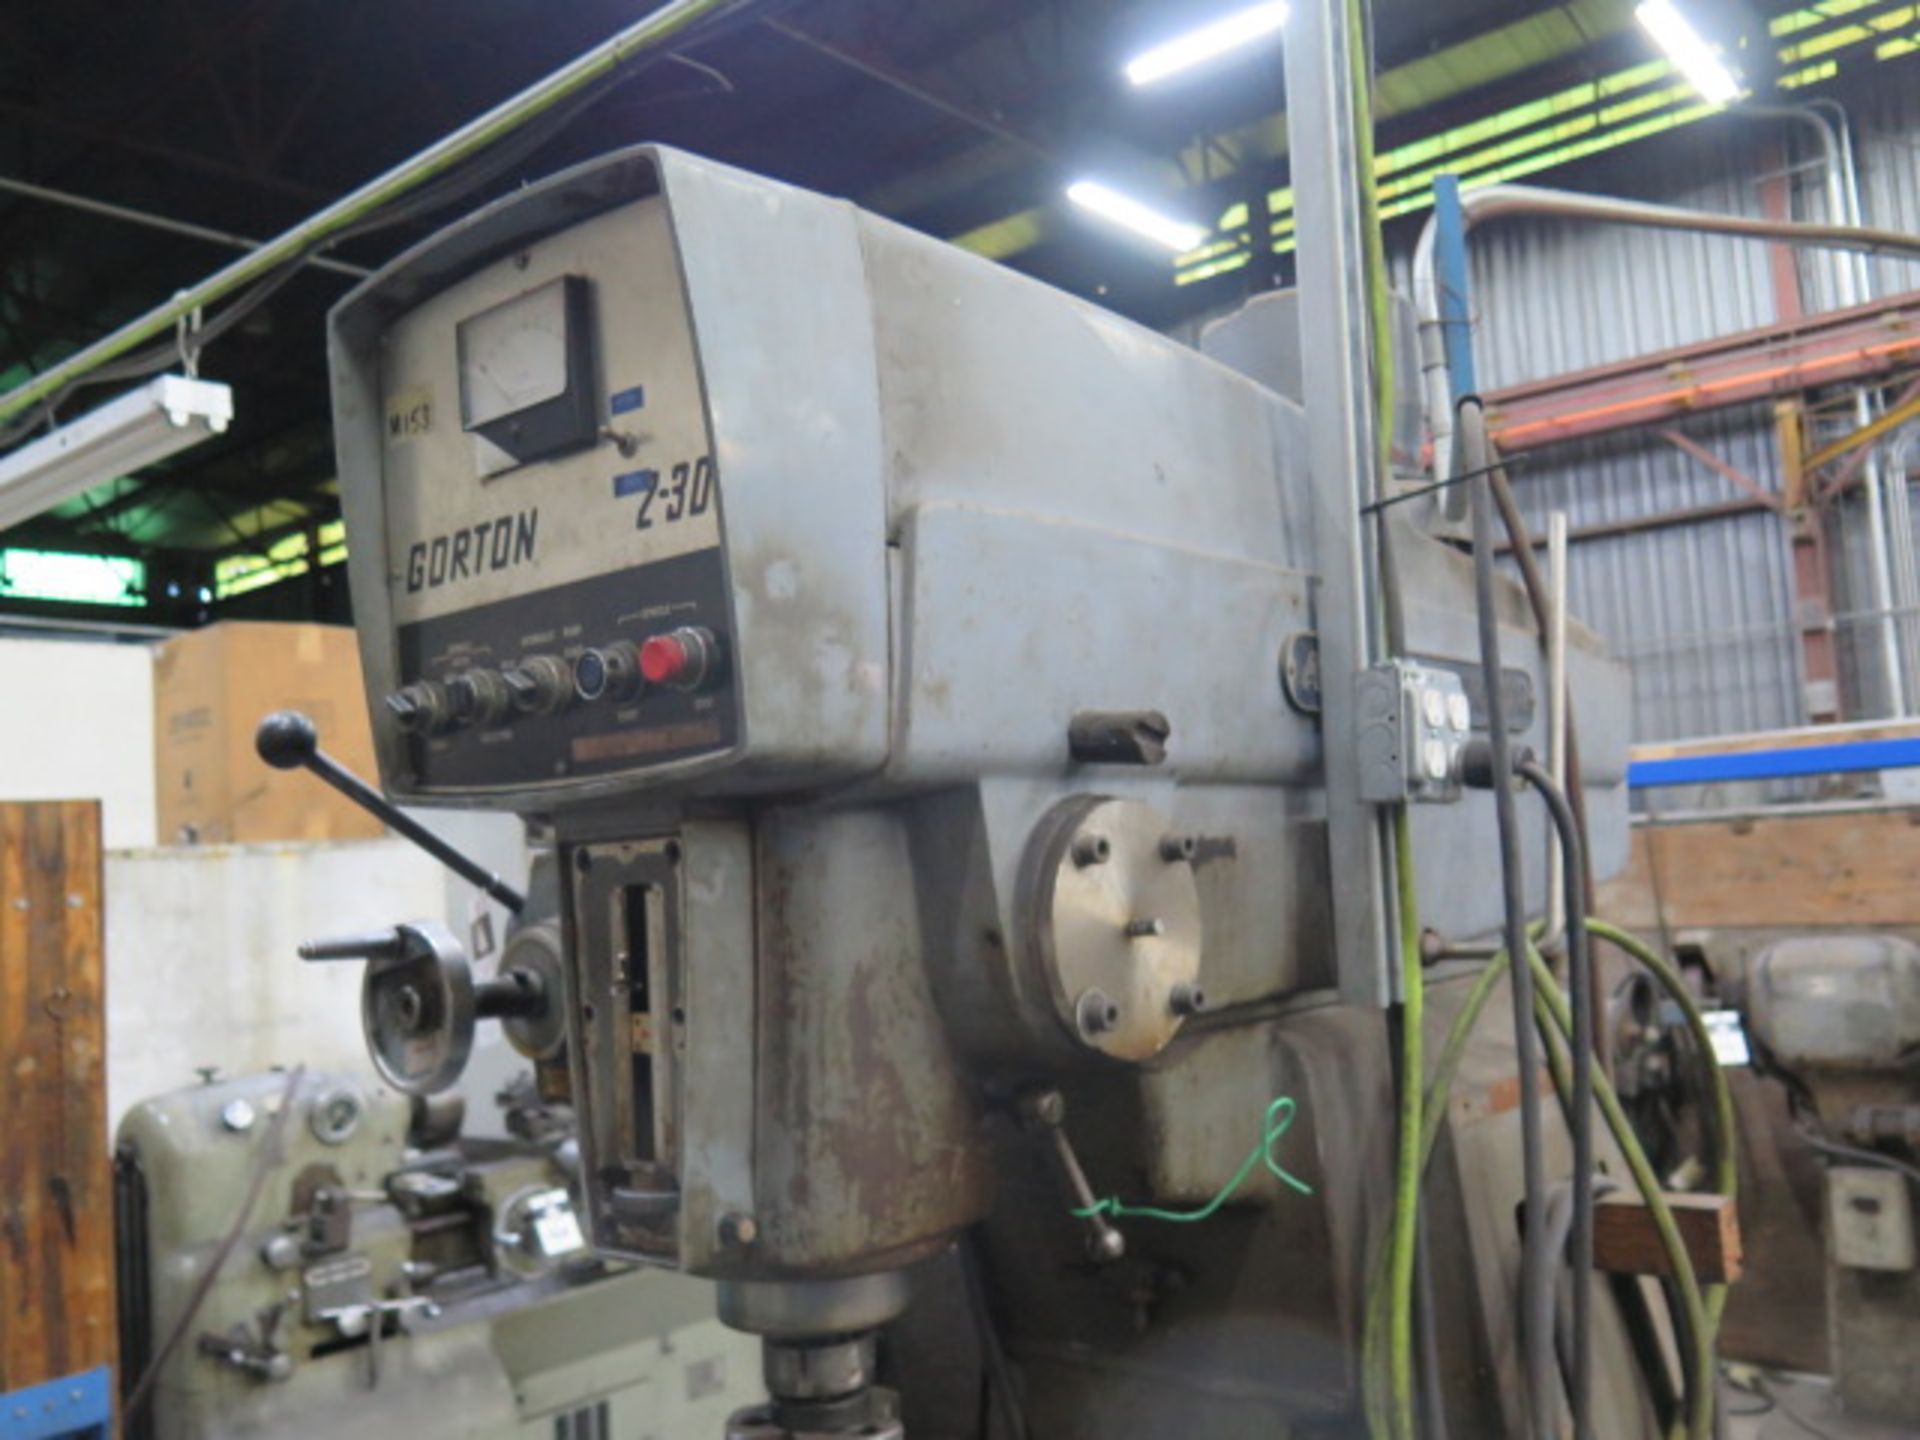 Gorton 2-30 Auto Trace Master Vertical Mill w/ Universal Kwik-Switch Taper Spindle, SOLD AS IS - Bild 5 aus 9